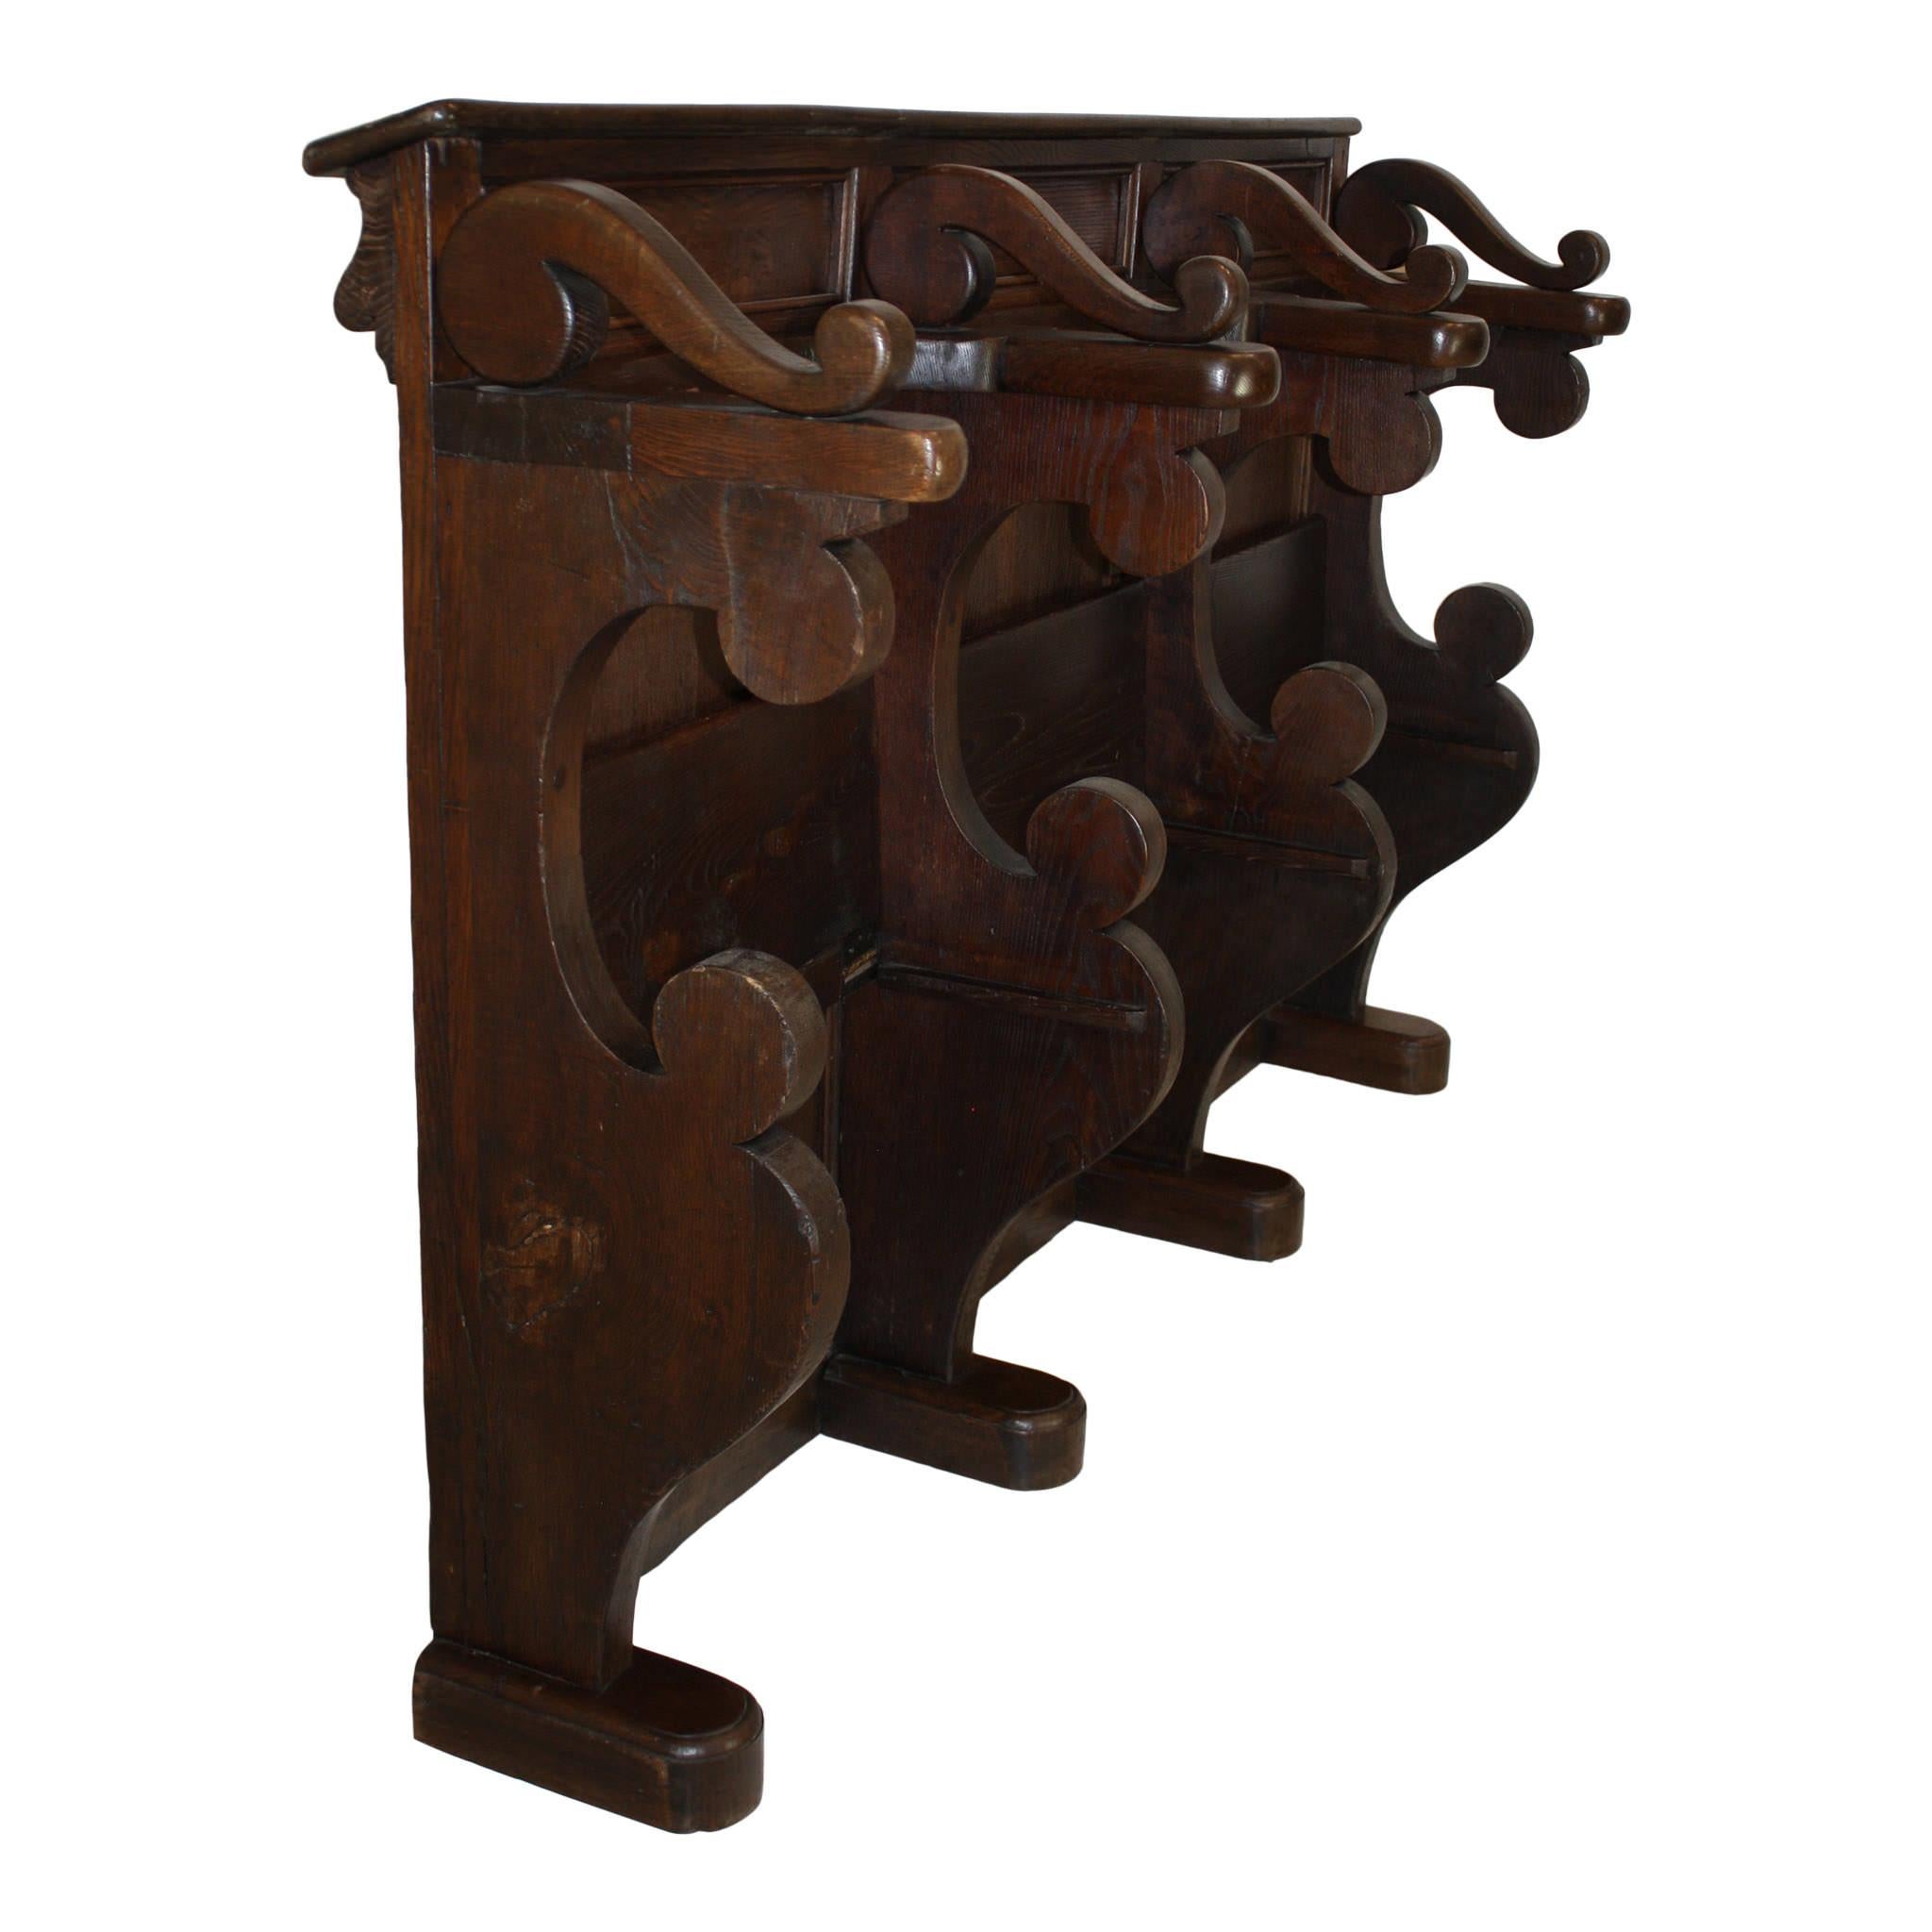 Some call it a church pew, others say it is a choir stall. Regardless of the term you use, this rare bench is remarkable. It is comprised of three sections, divided by C-scroll partitions, with a folding seat in each. The seats rise for standing or